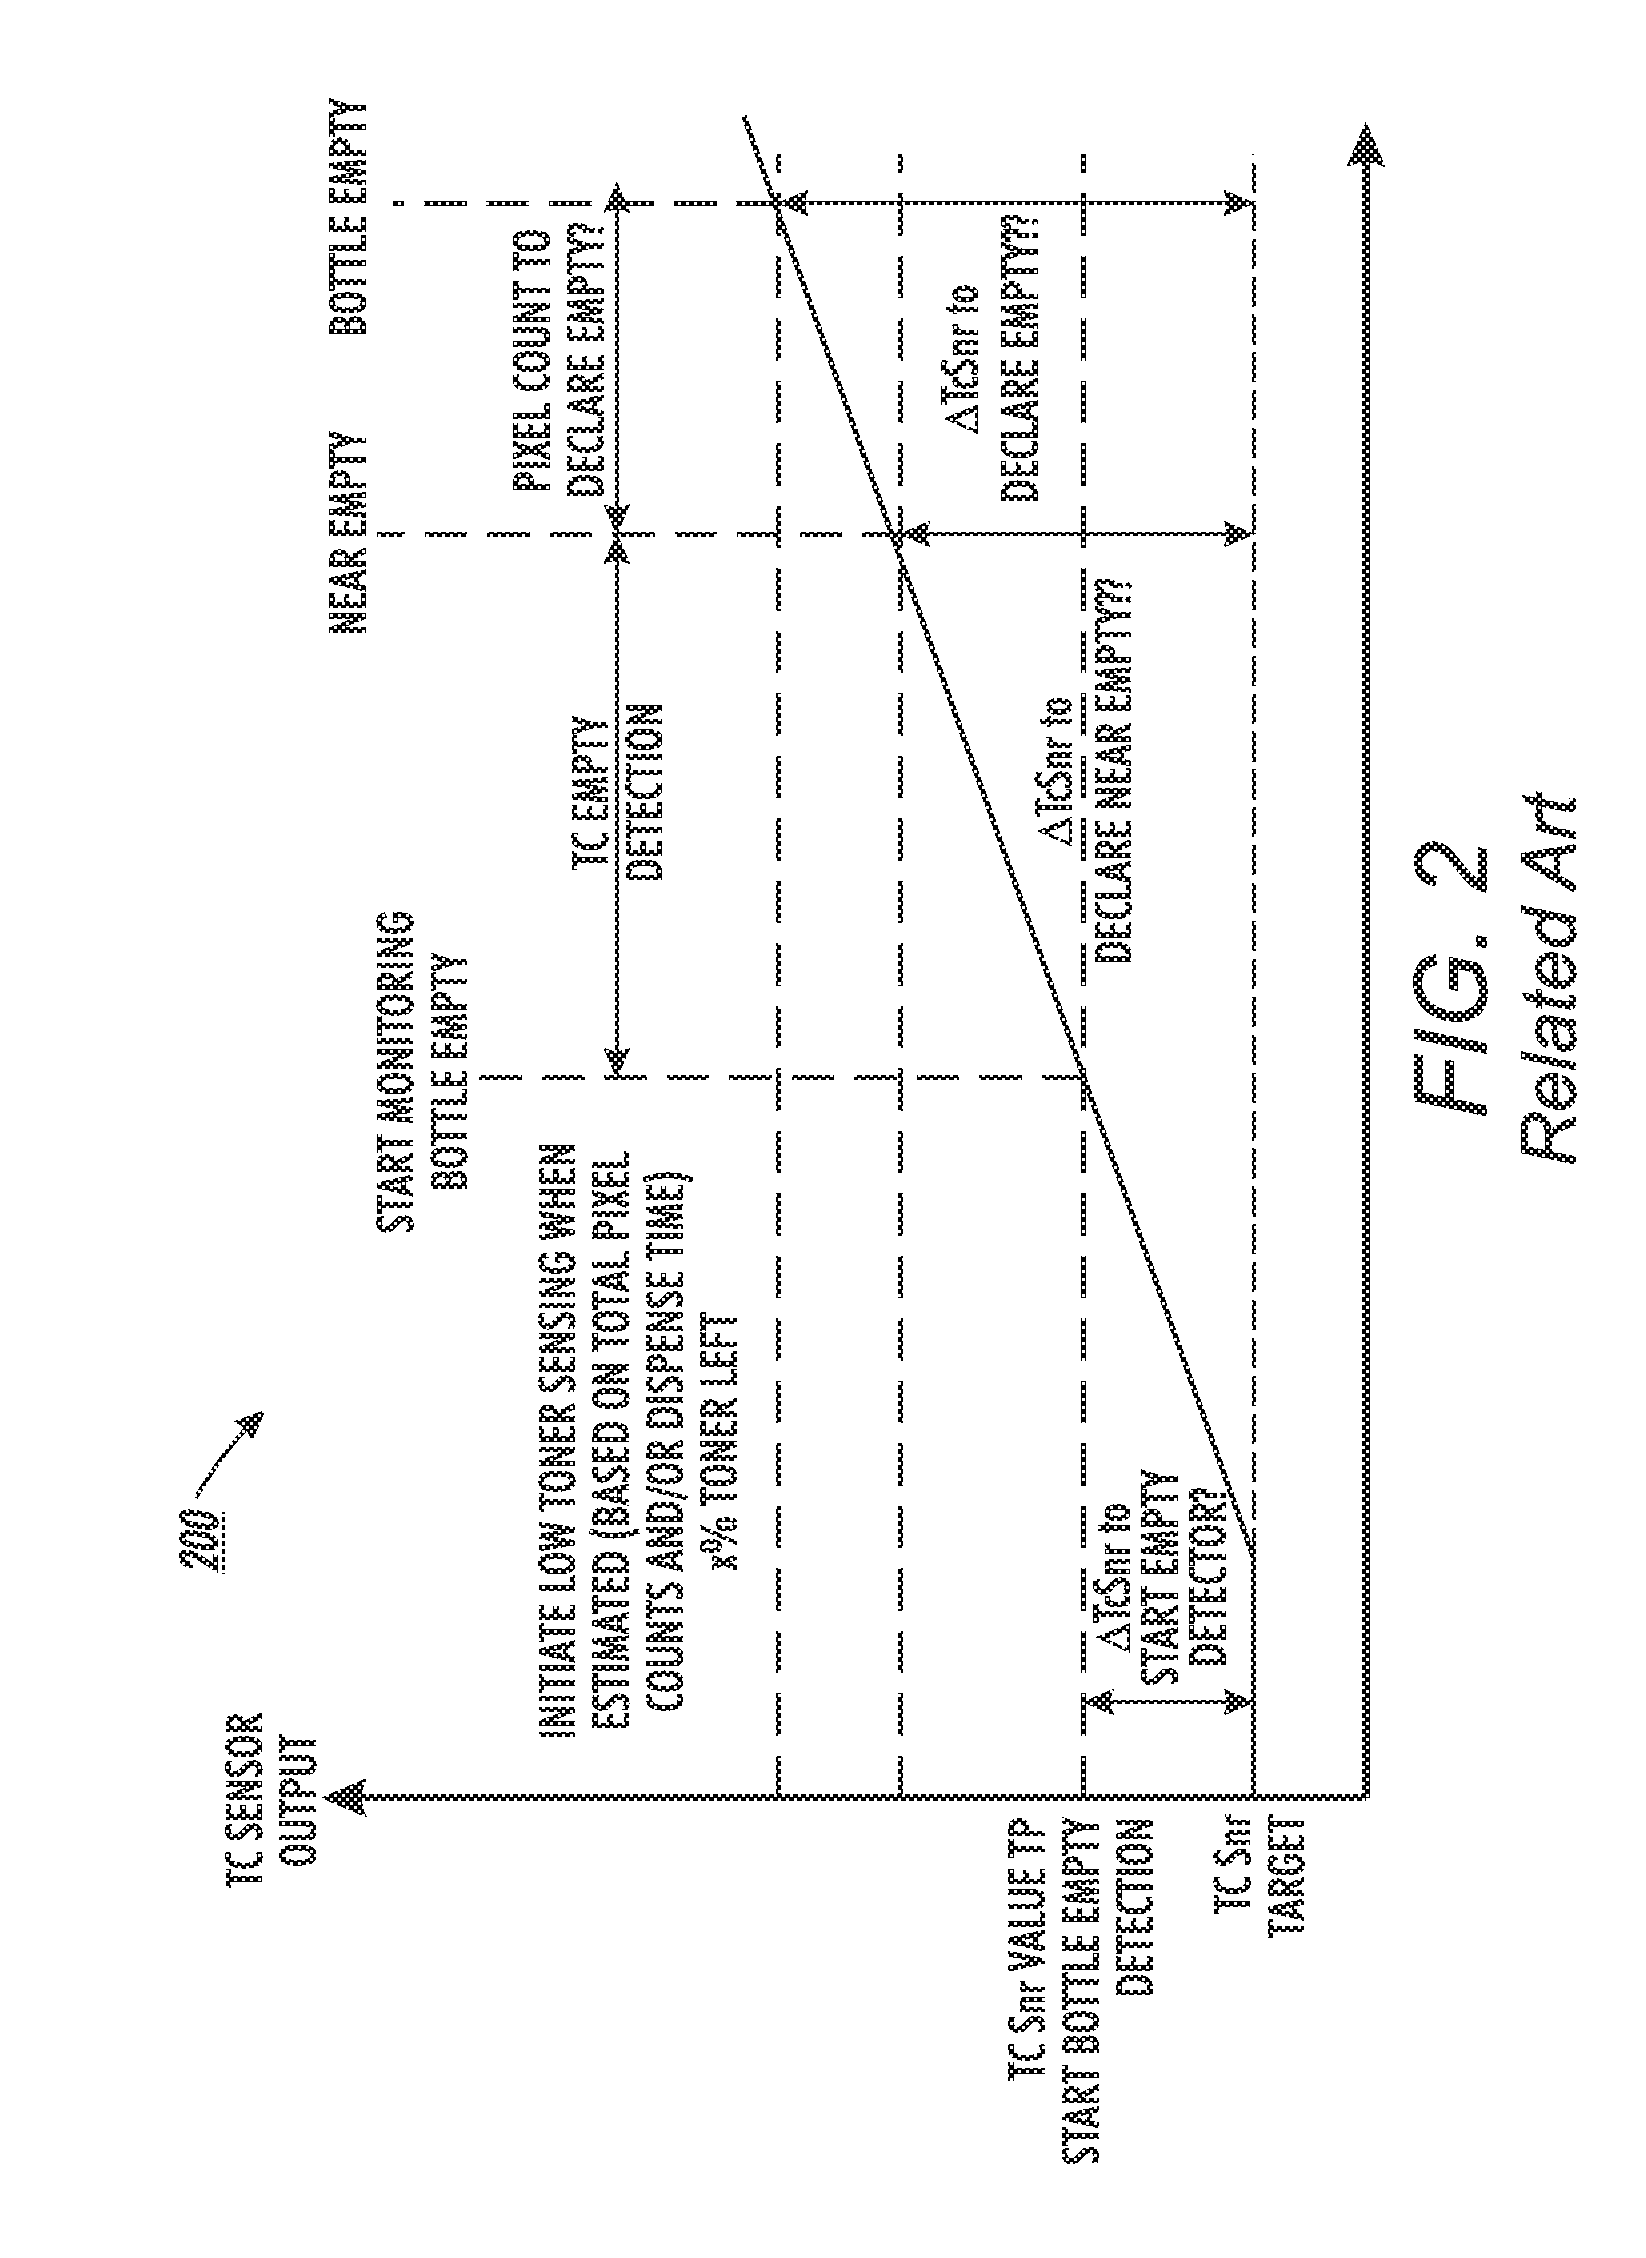 Systems and methods for implementing advanced toner dispensing and emptying of toner cartridge components in image forming devices